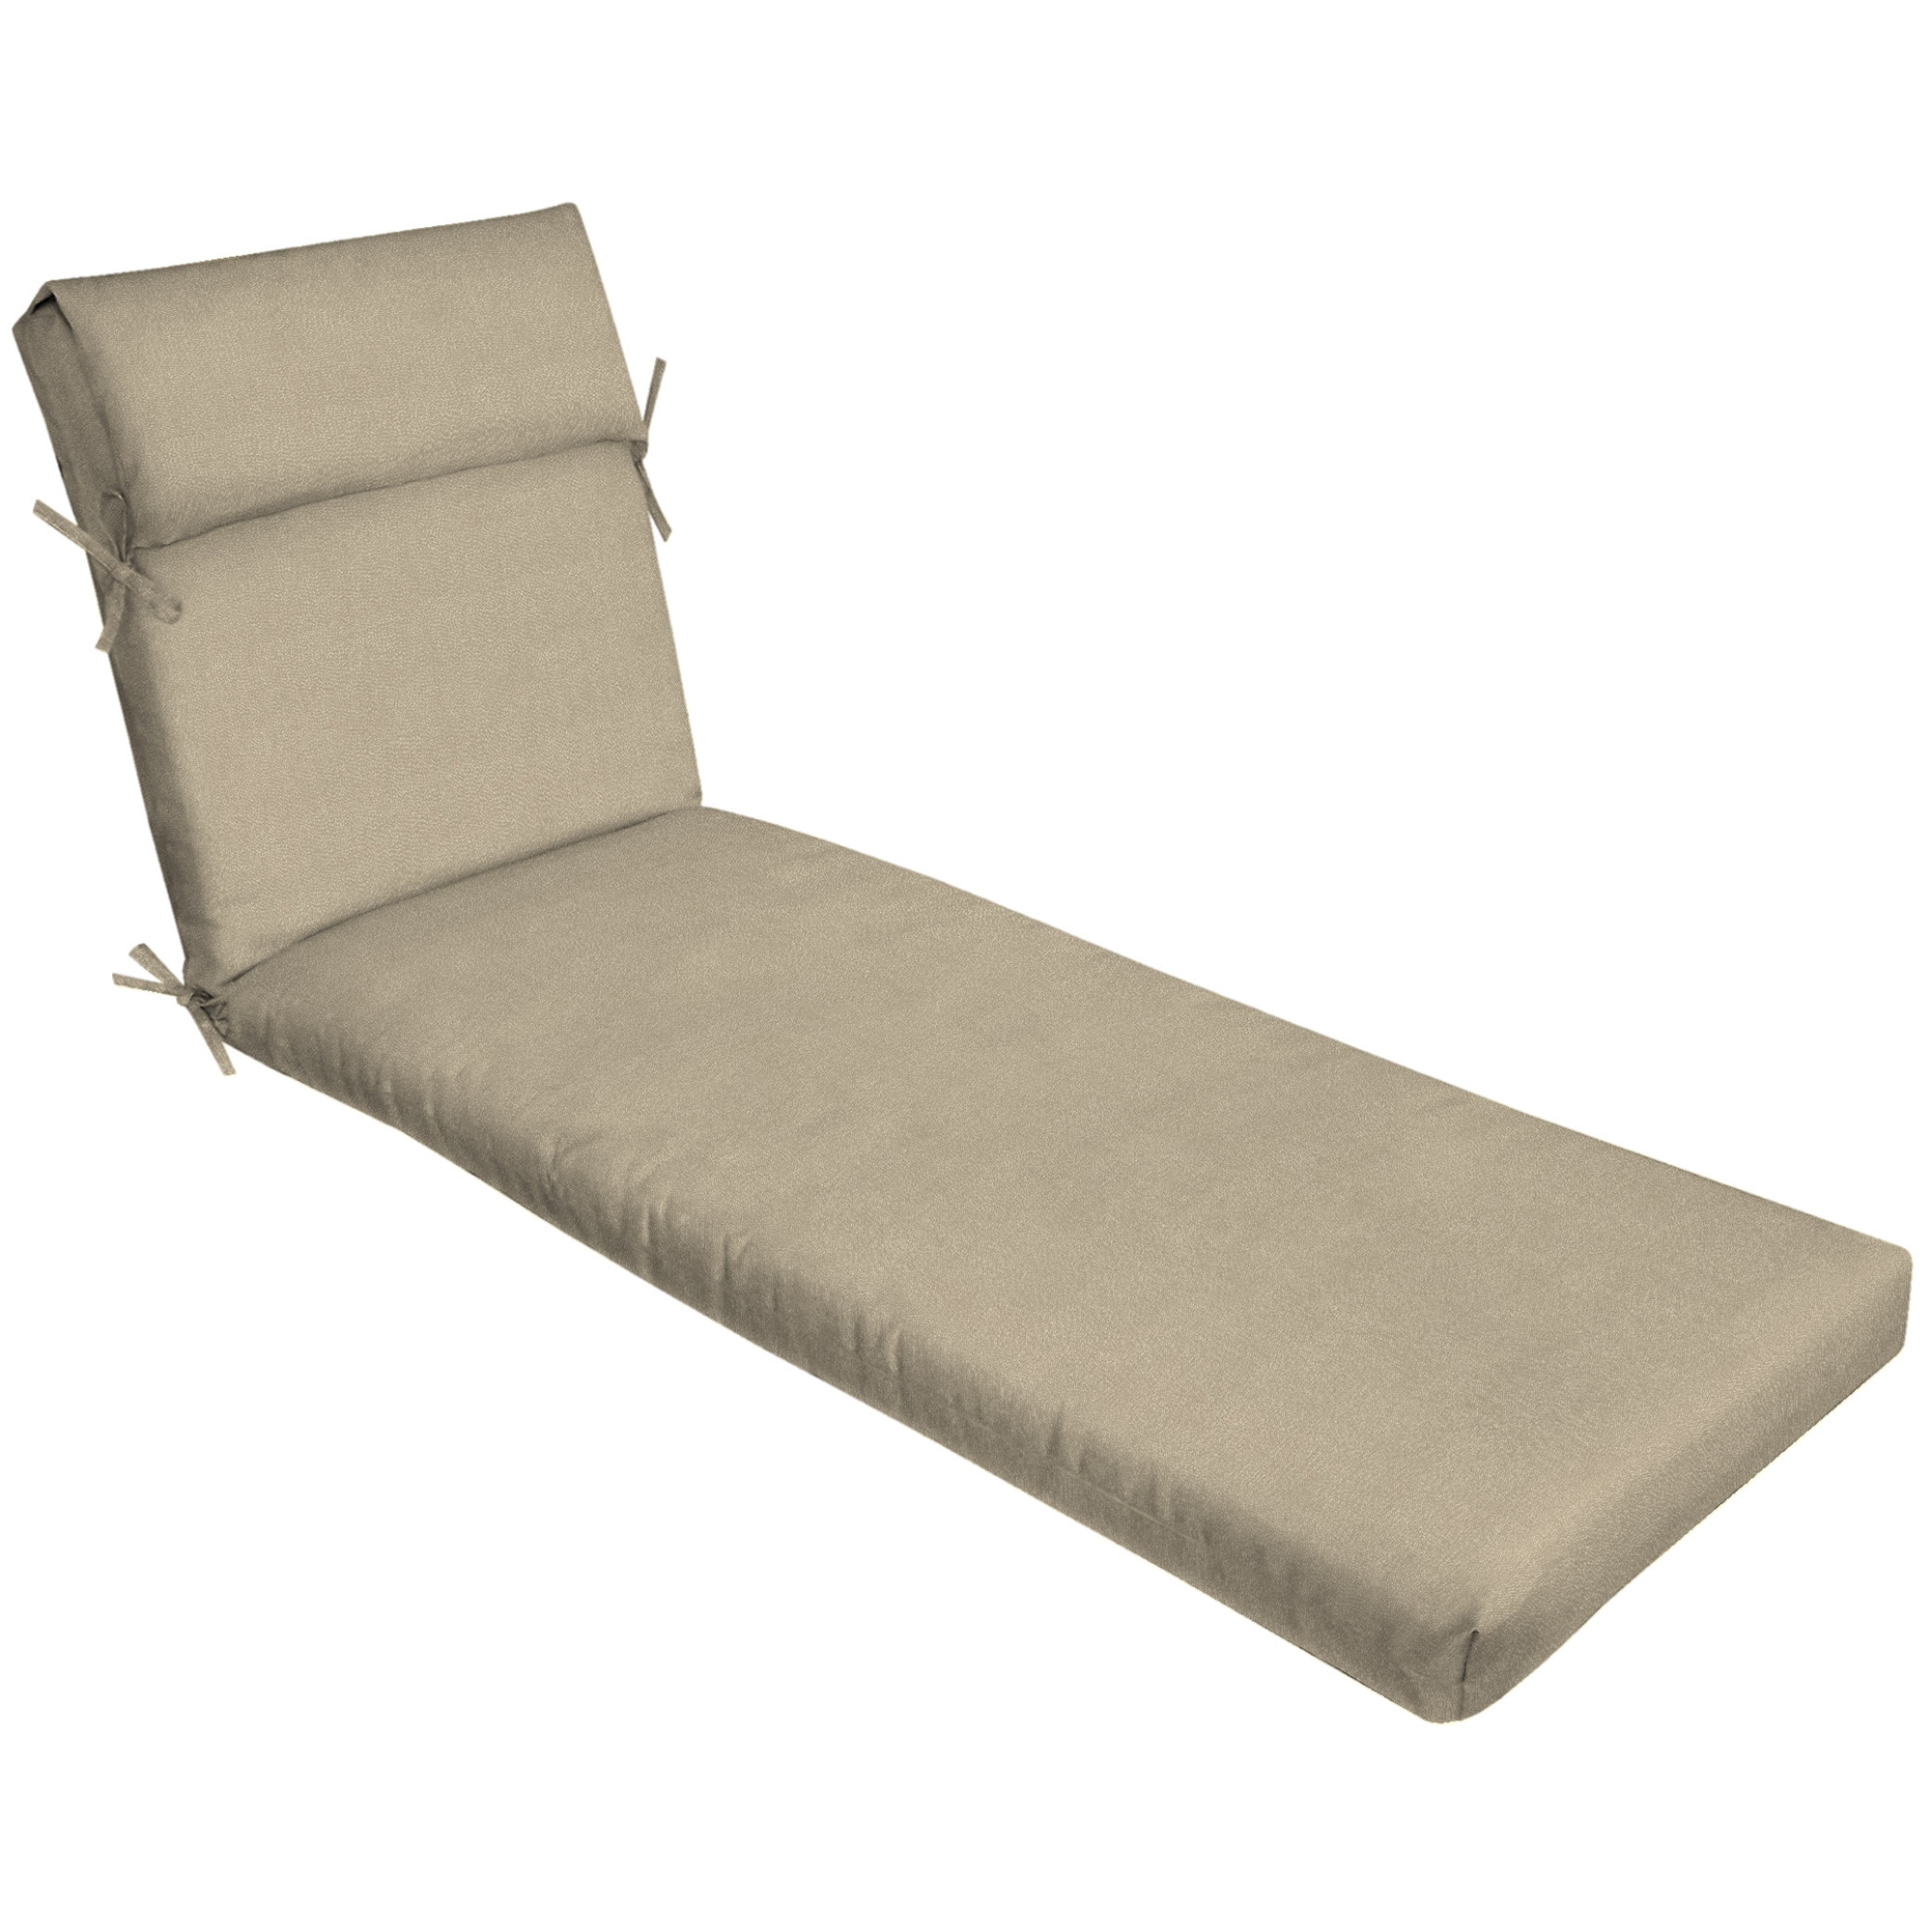 Details about   Allen Roth Wheat Patio Chaise Lounge Chair Cushion 